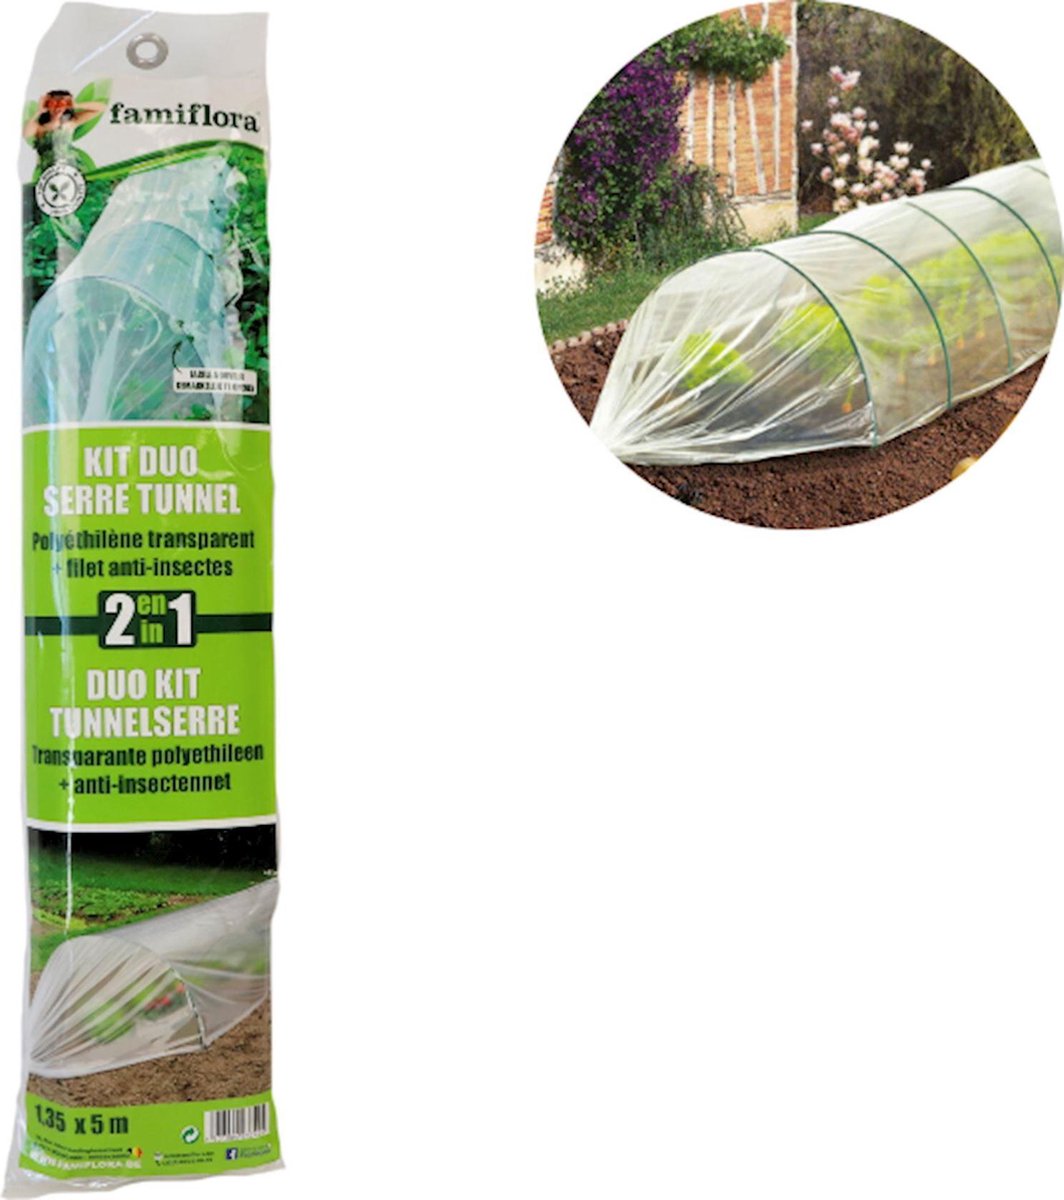 2-in-1 duo kit tunnelserre + anti-insectennet - Famiflora